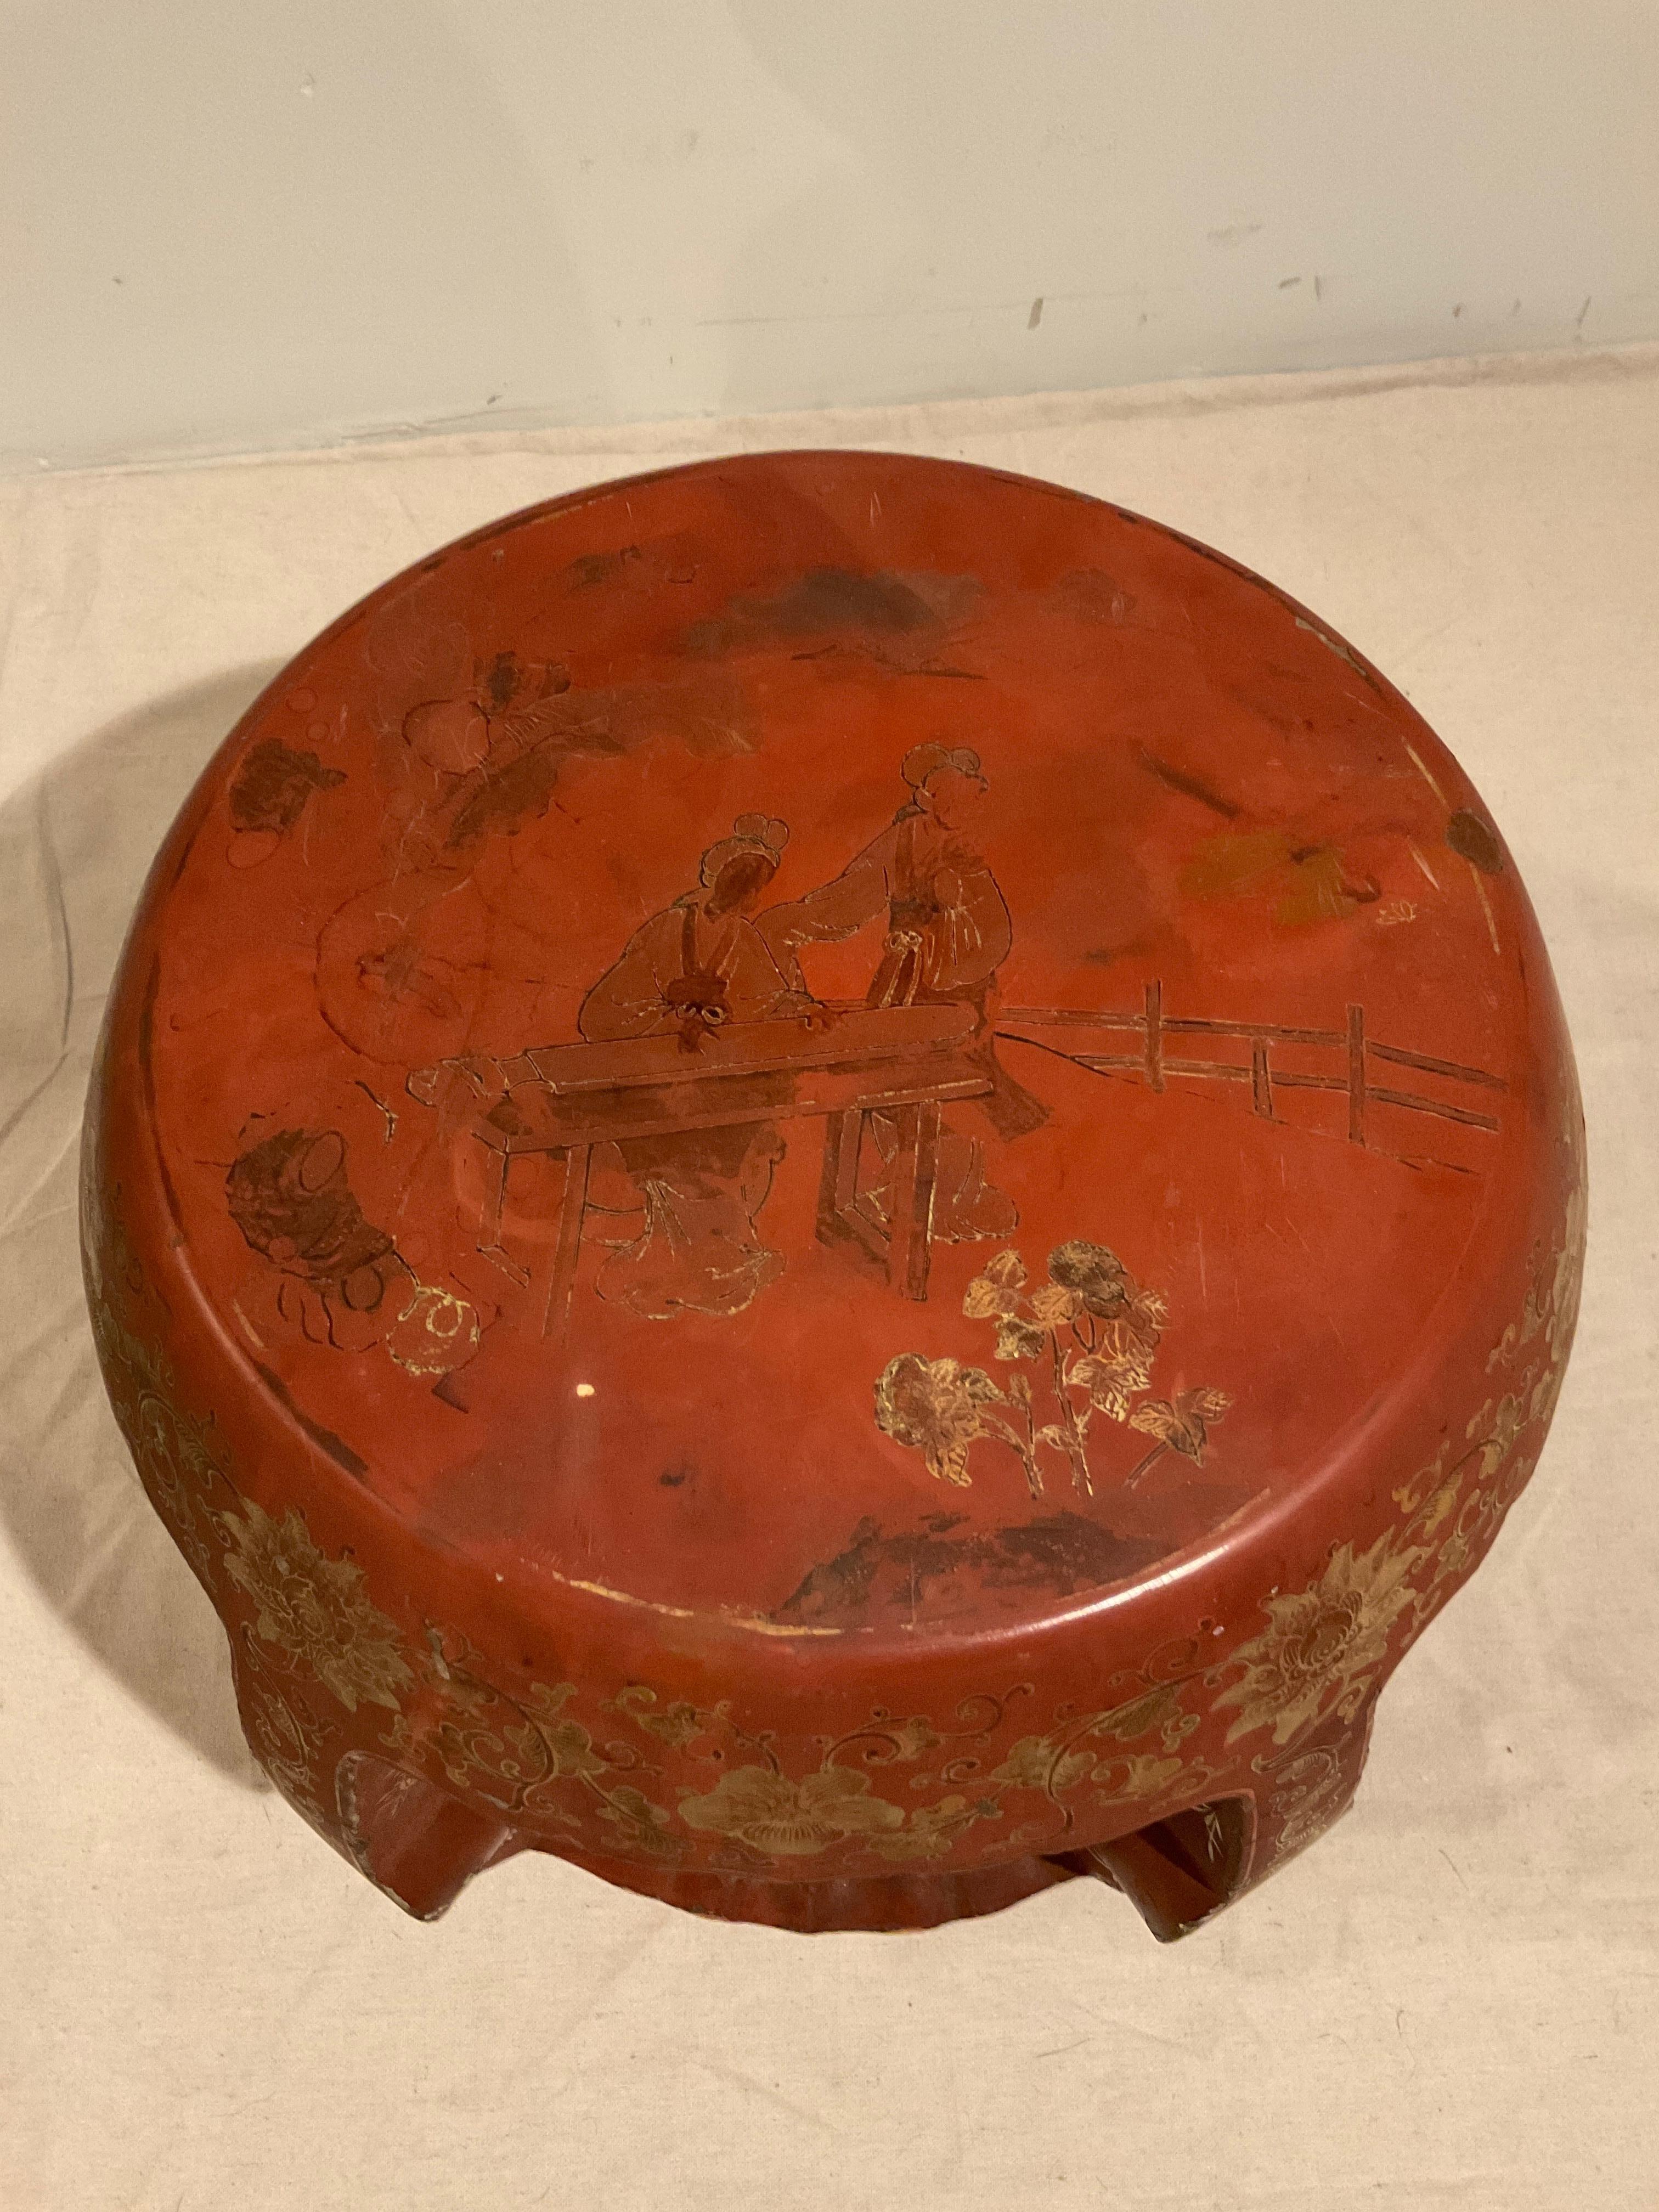 Hand painted chinoiserie garden stool / side table. Some chips in finish.